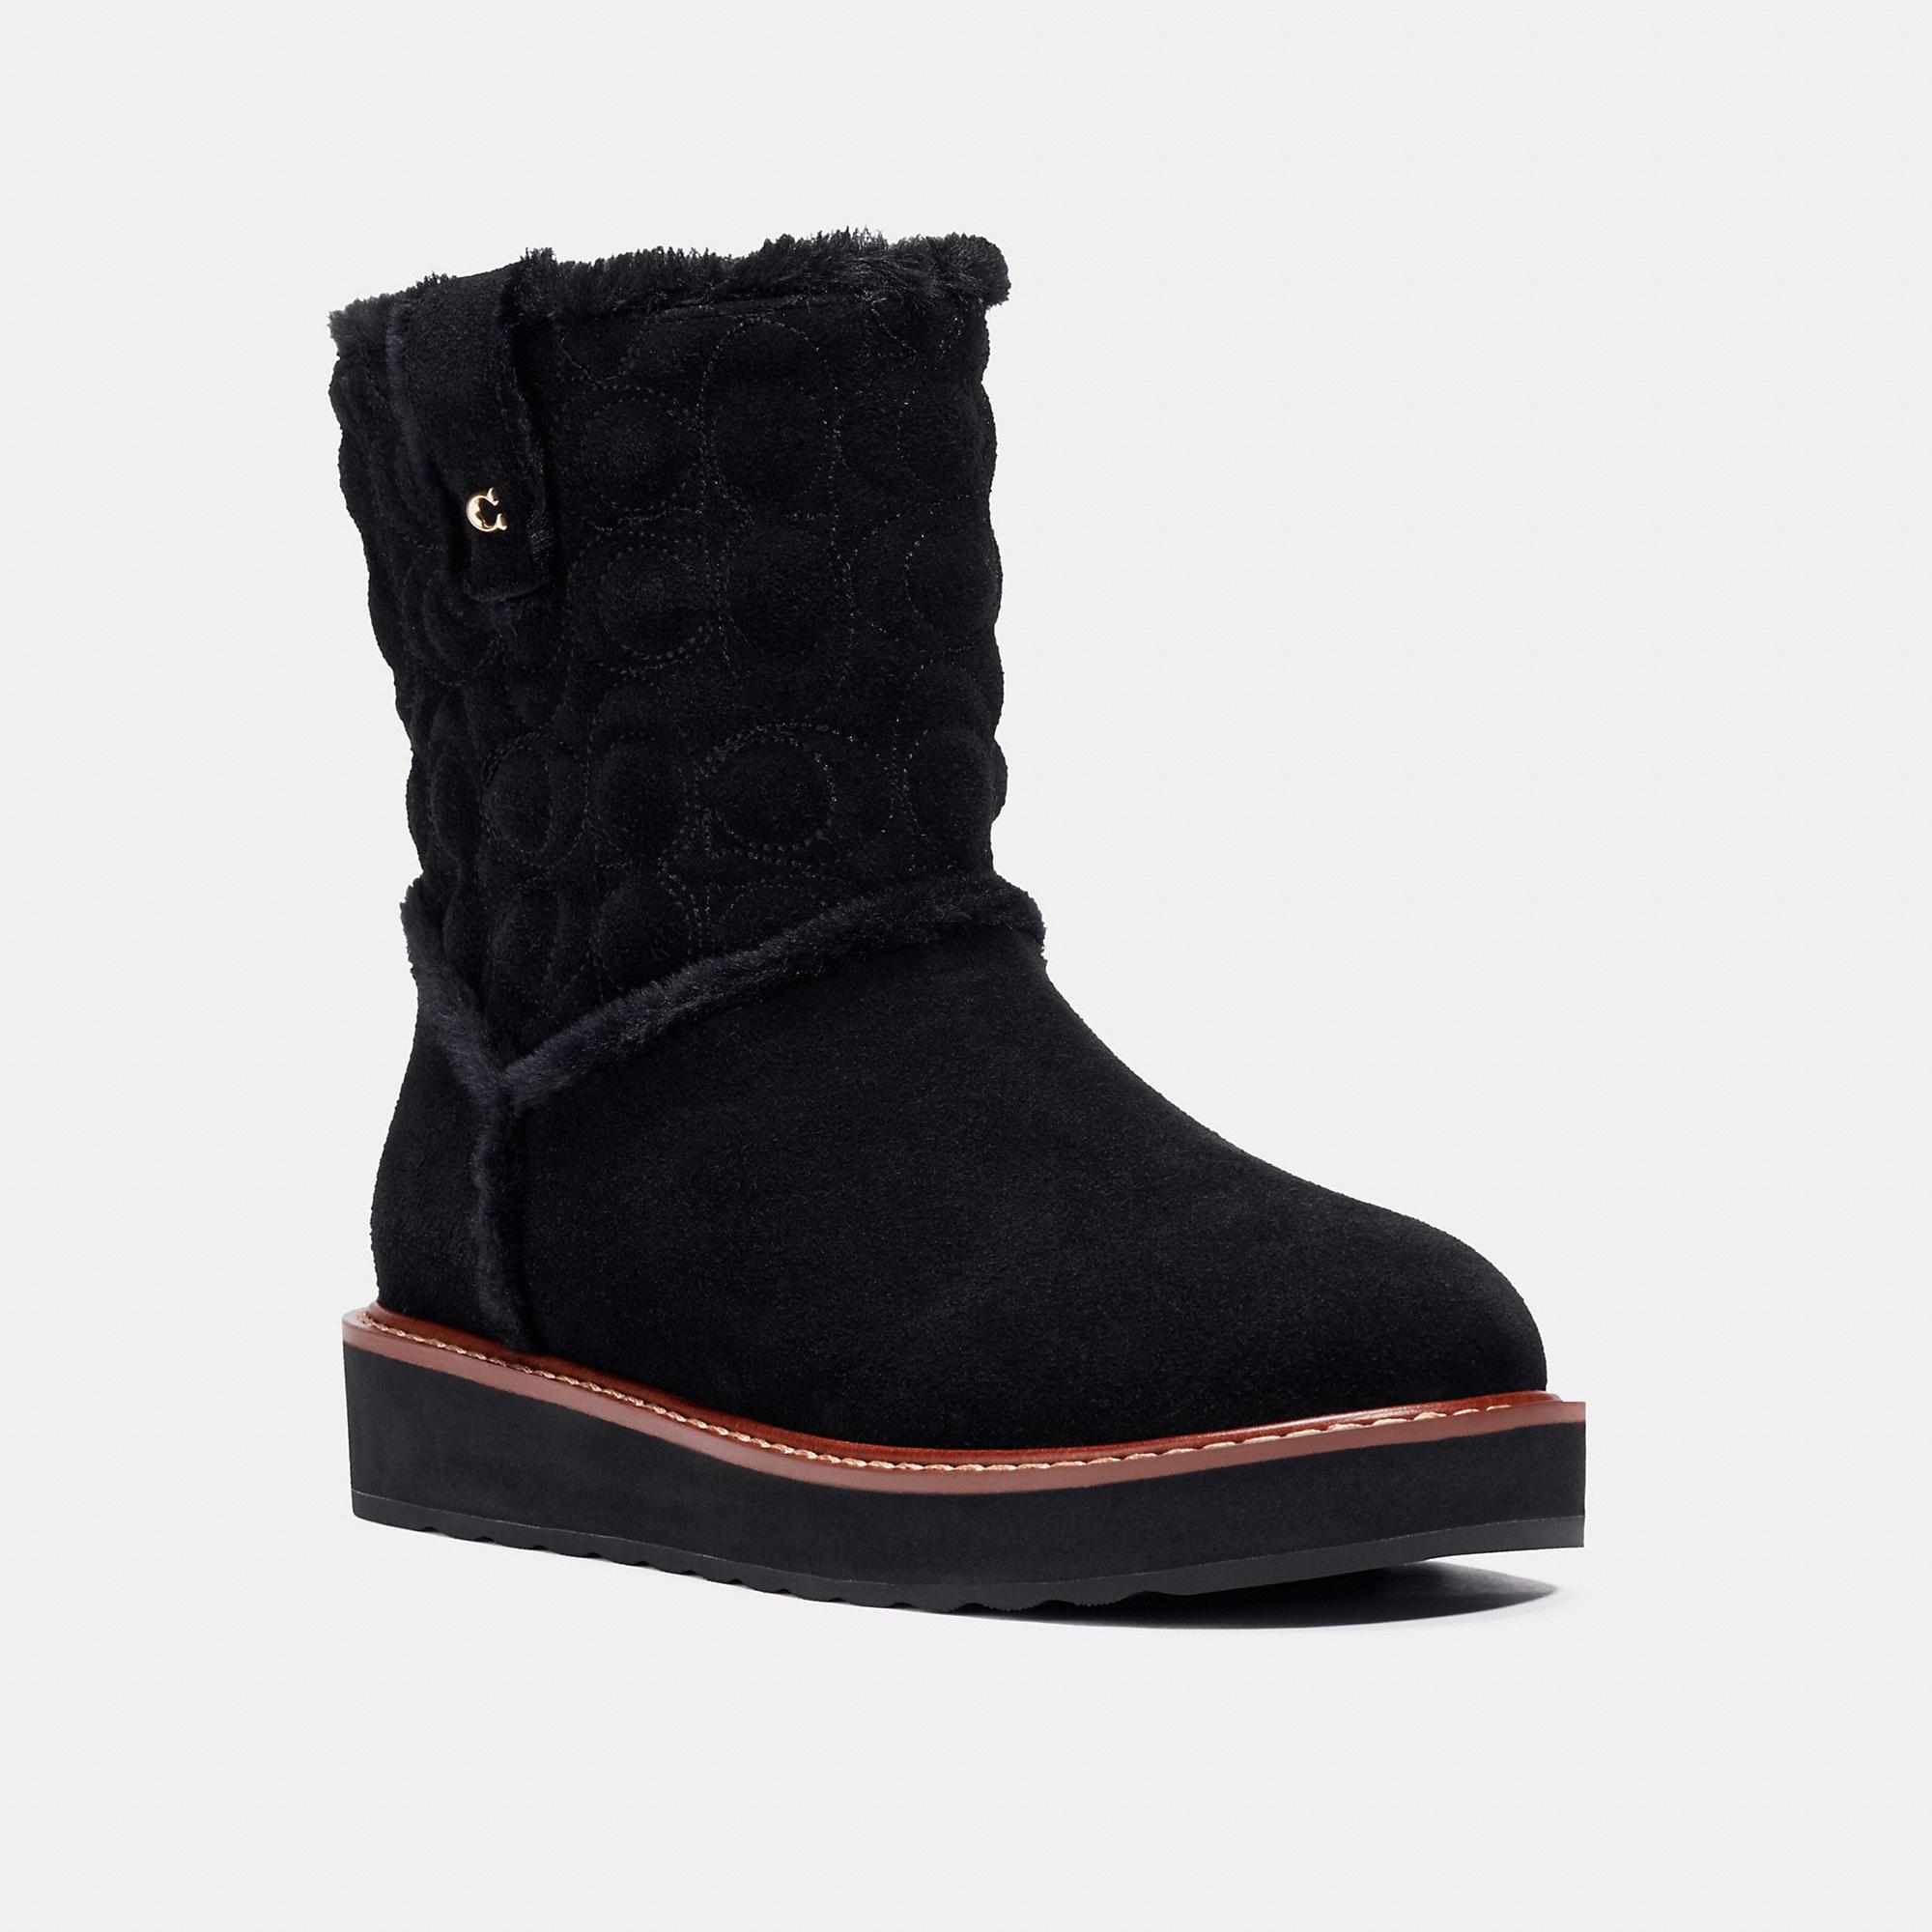 COACH Ivy Boot in Black - Lyst